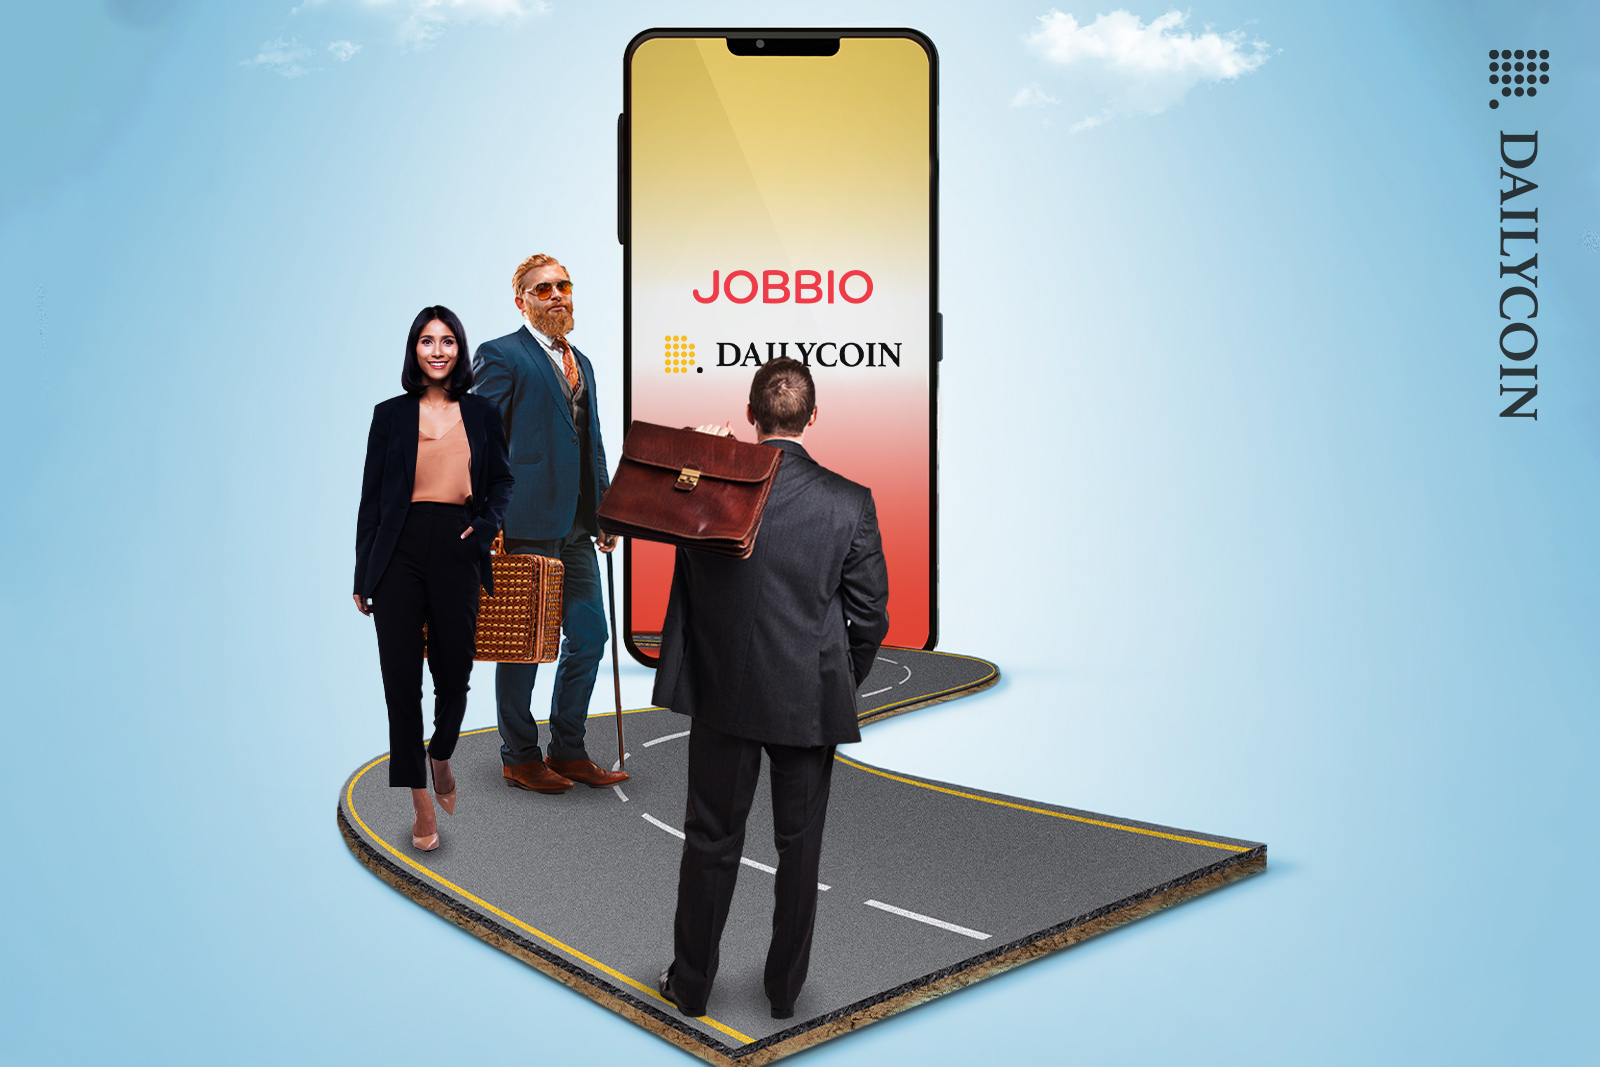 People walking towards a mobile phone displyaing DailyCoin x Jobbio for new opportunities.